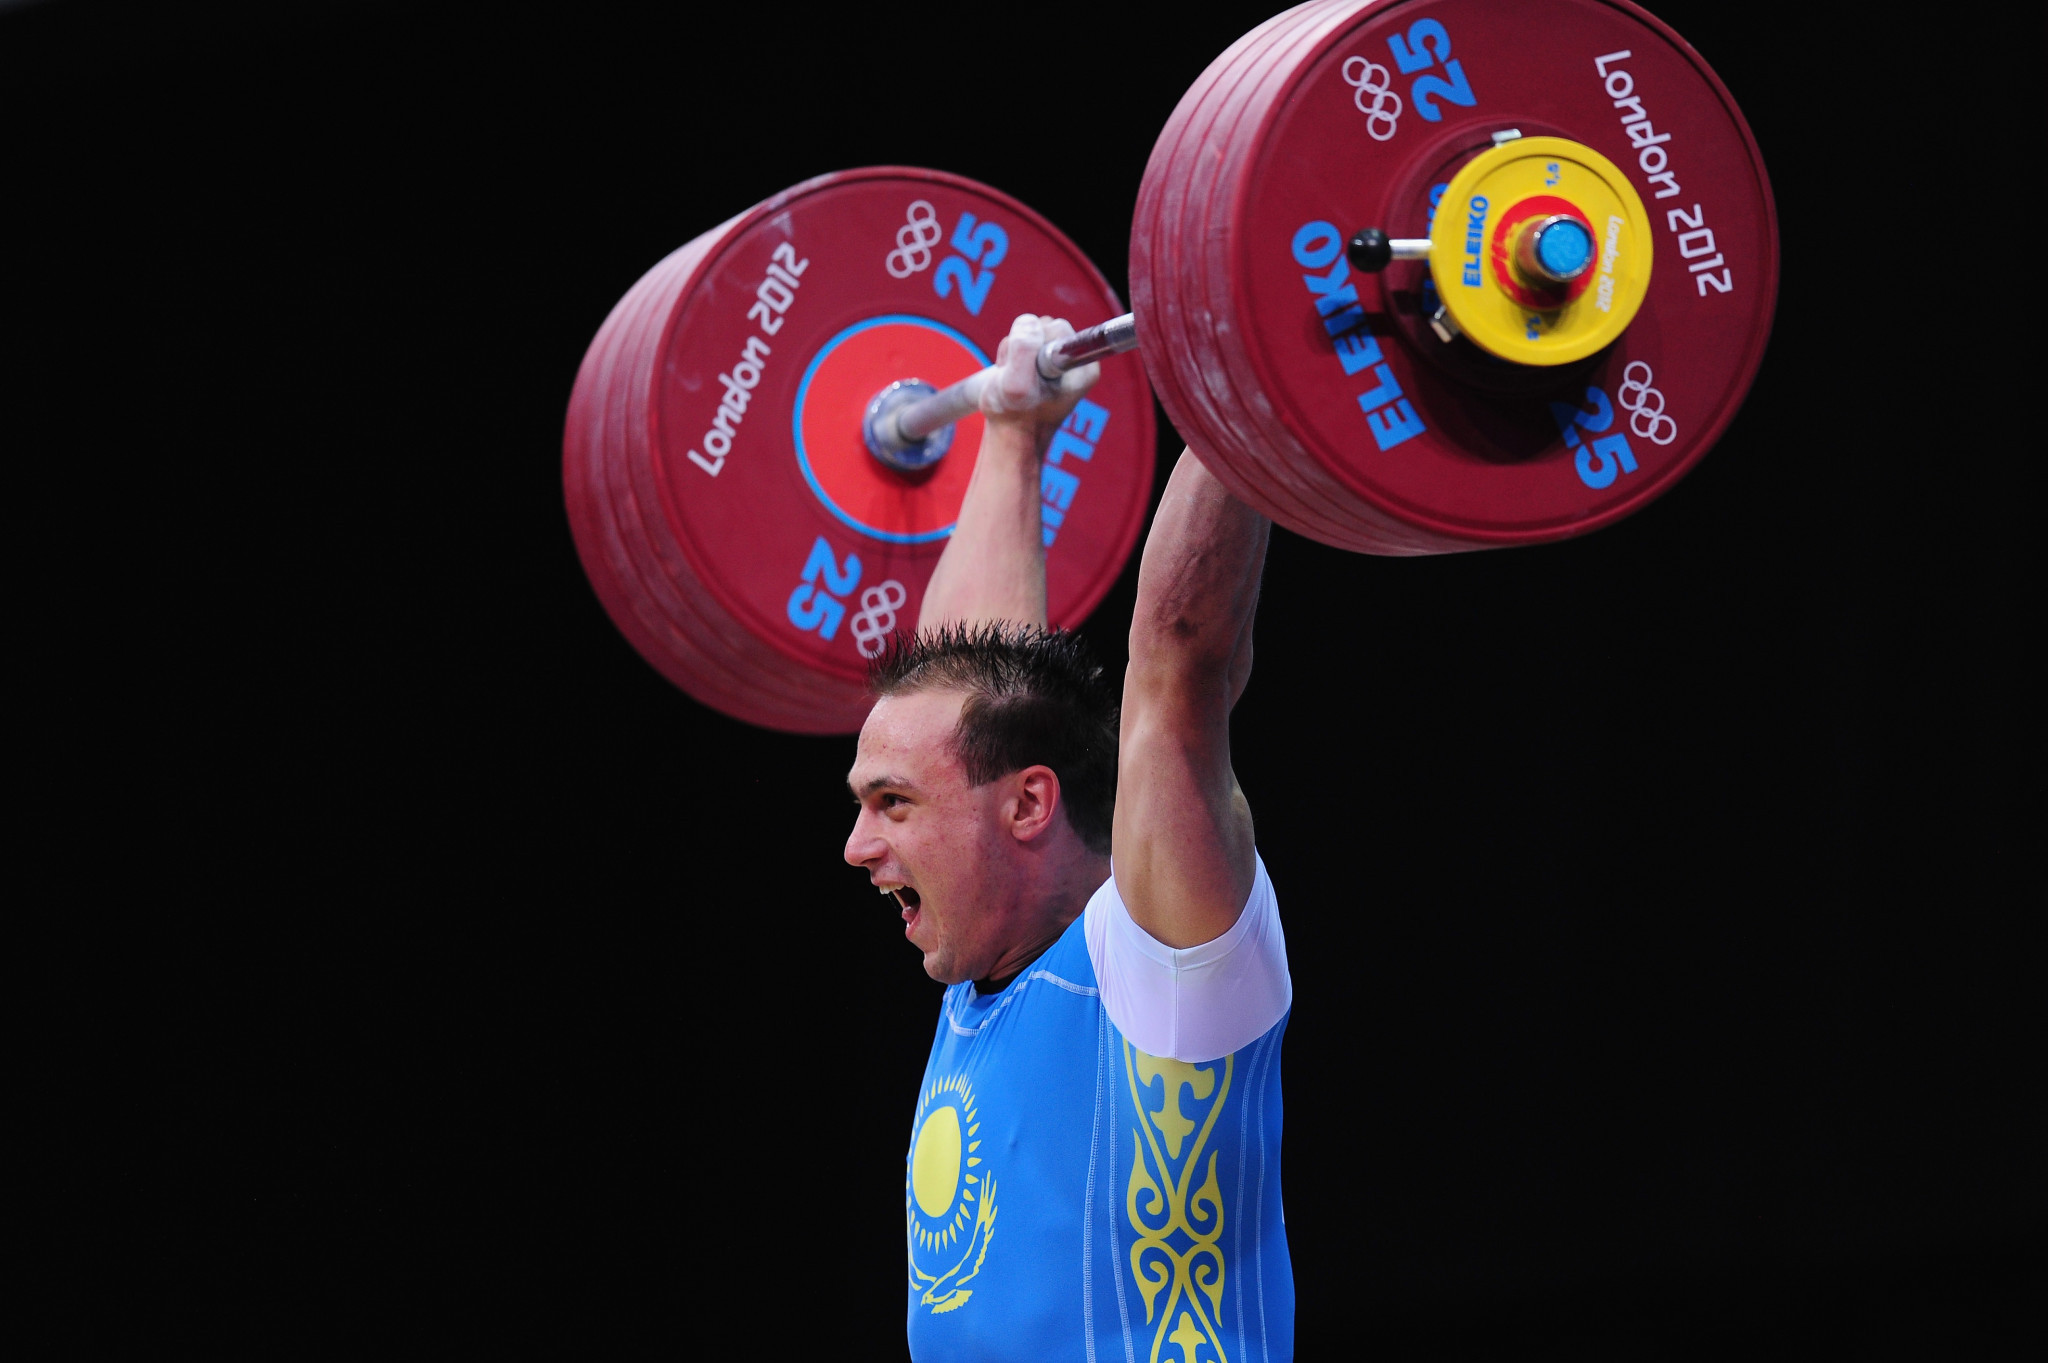 Exclusive: Olympic medallists slam weightlifting dopers - and those who support them